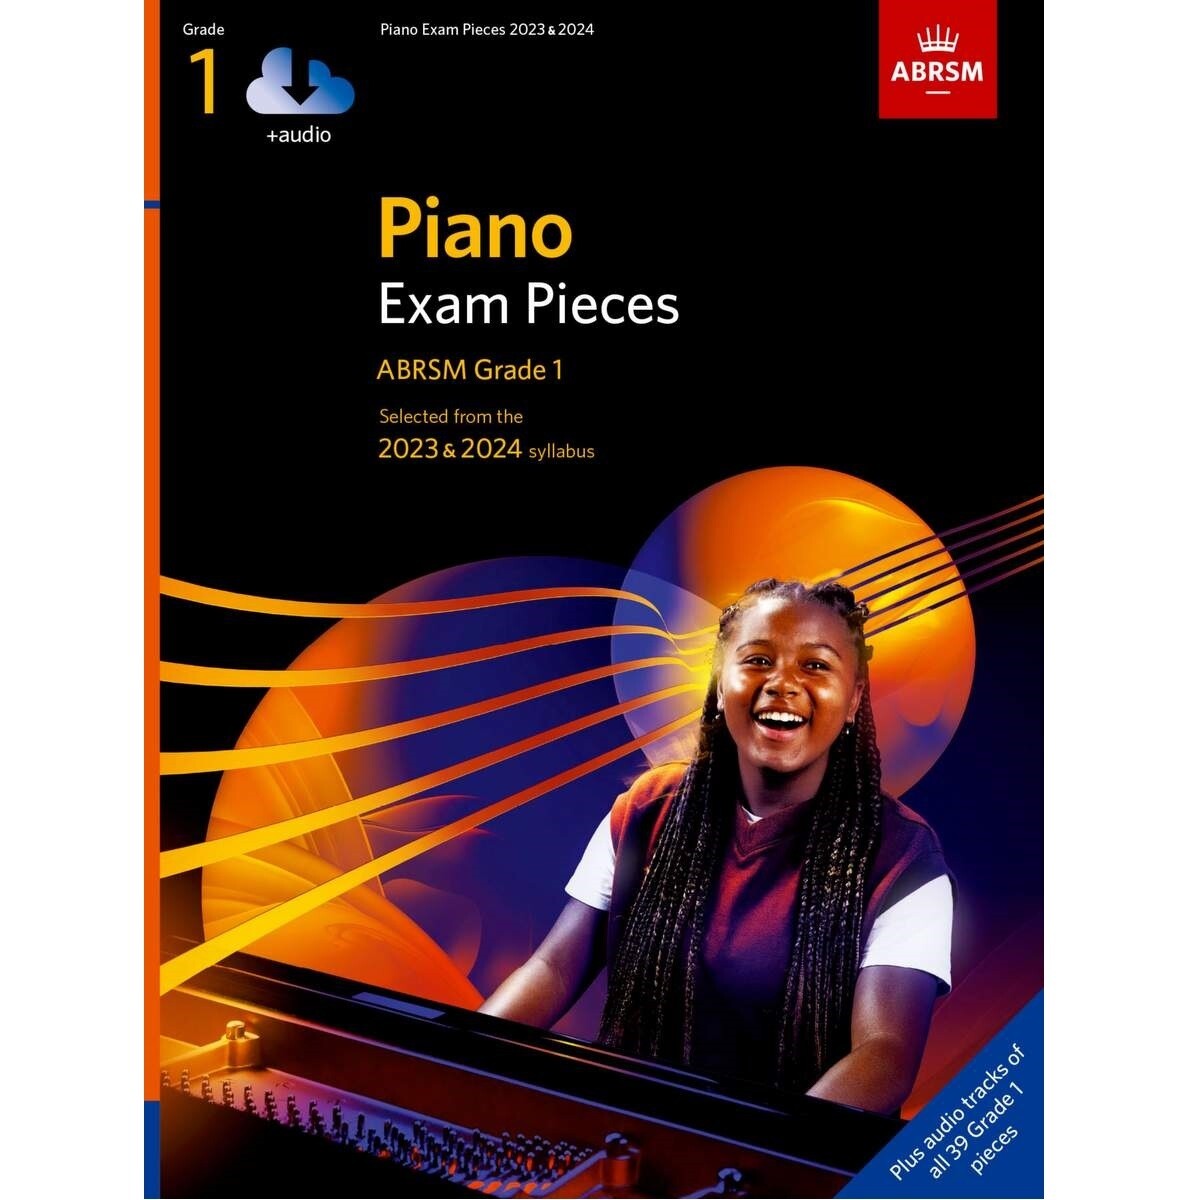 ABRSM Piano Exam Pieces 2023 and 2024 - Grade 1 (Book with Online Audio)